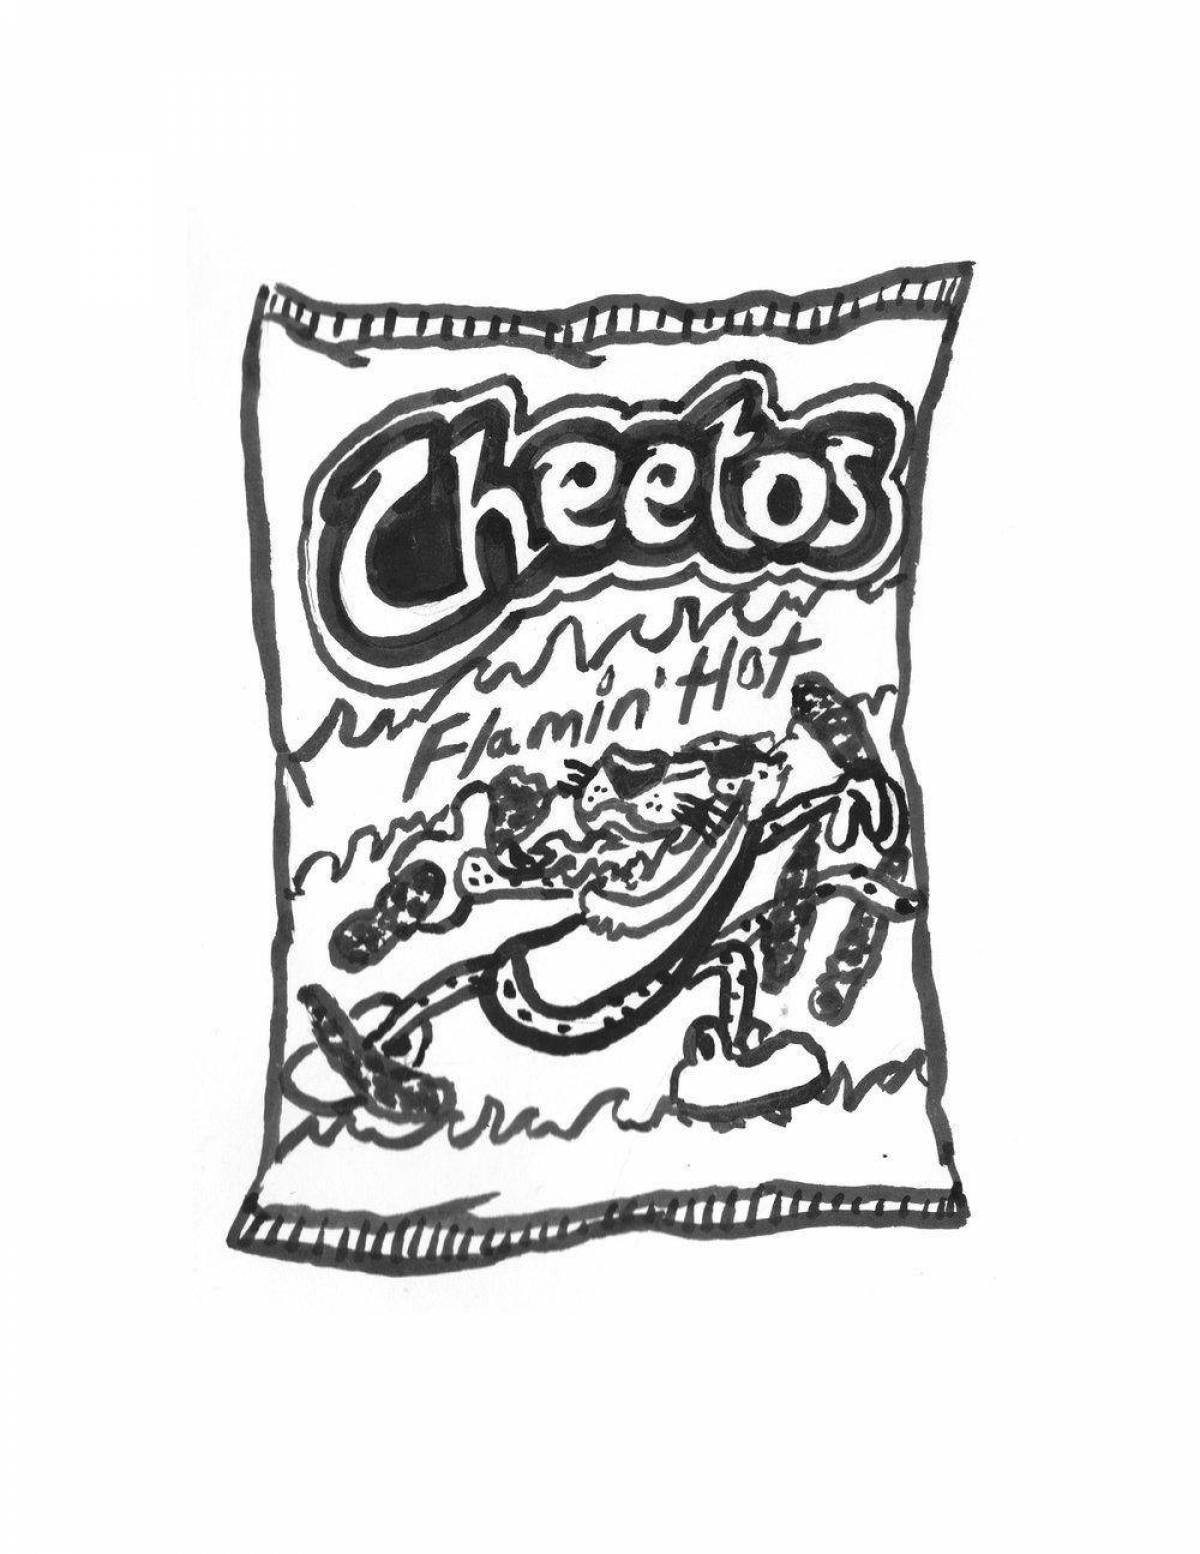 Fun coloring pack of chips